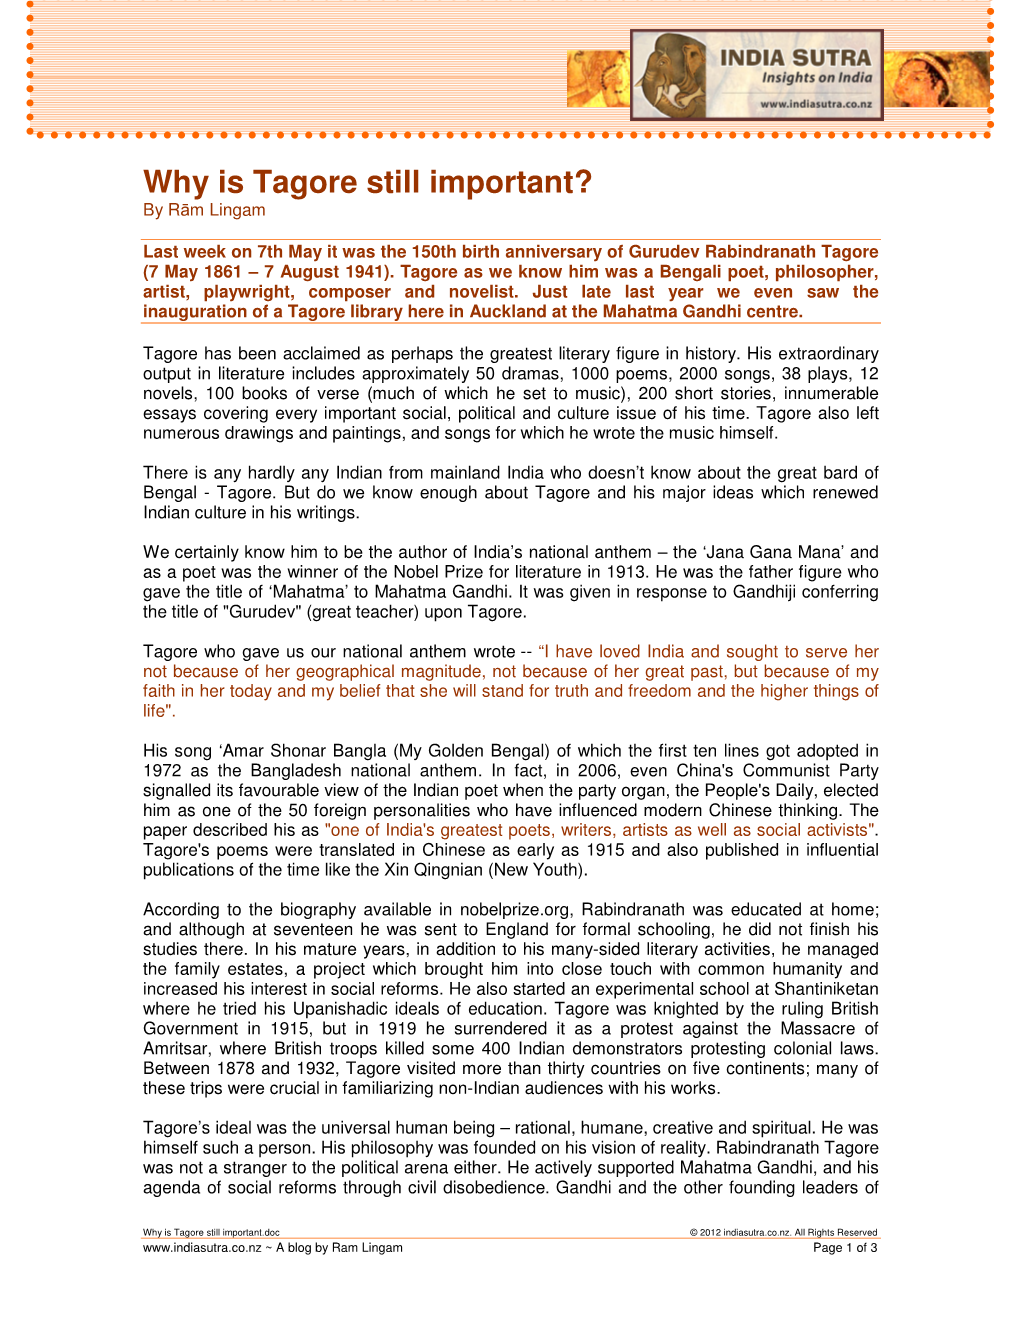 Why Is Tagore Still Important? by R Ām Lingam